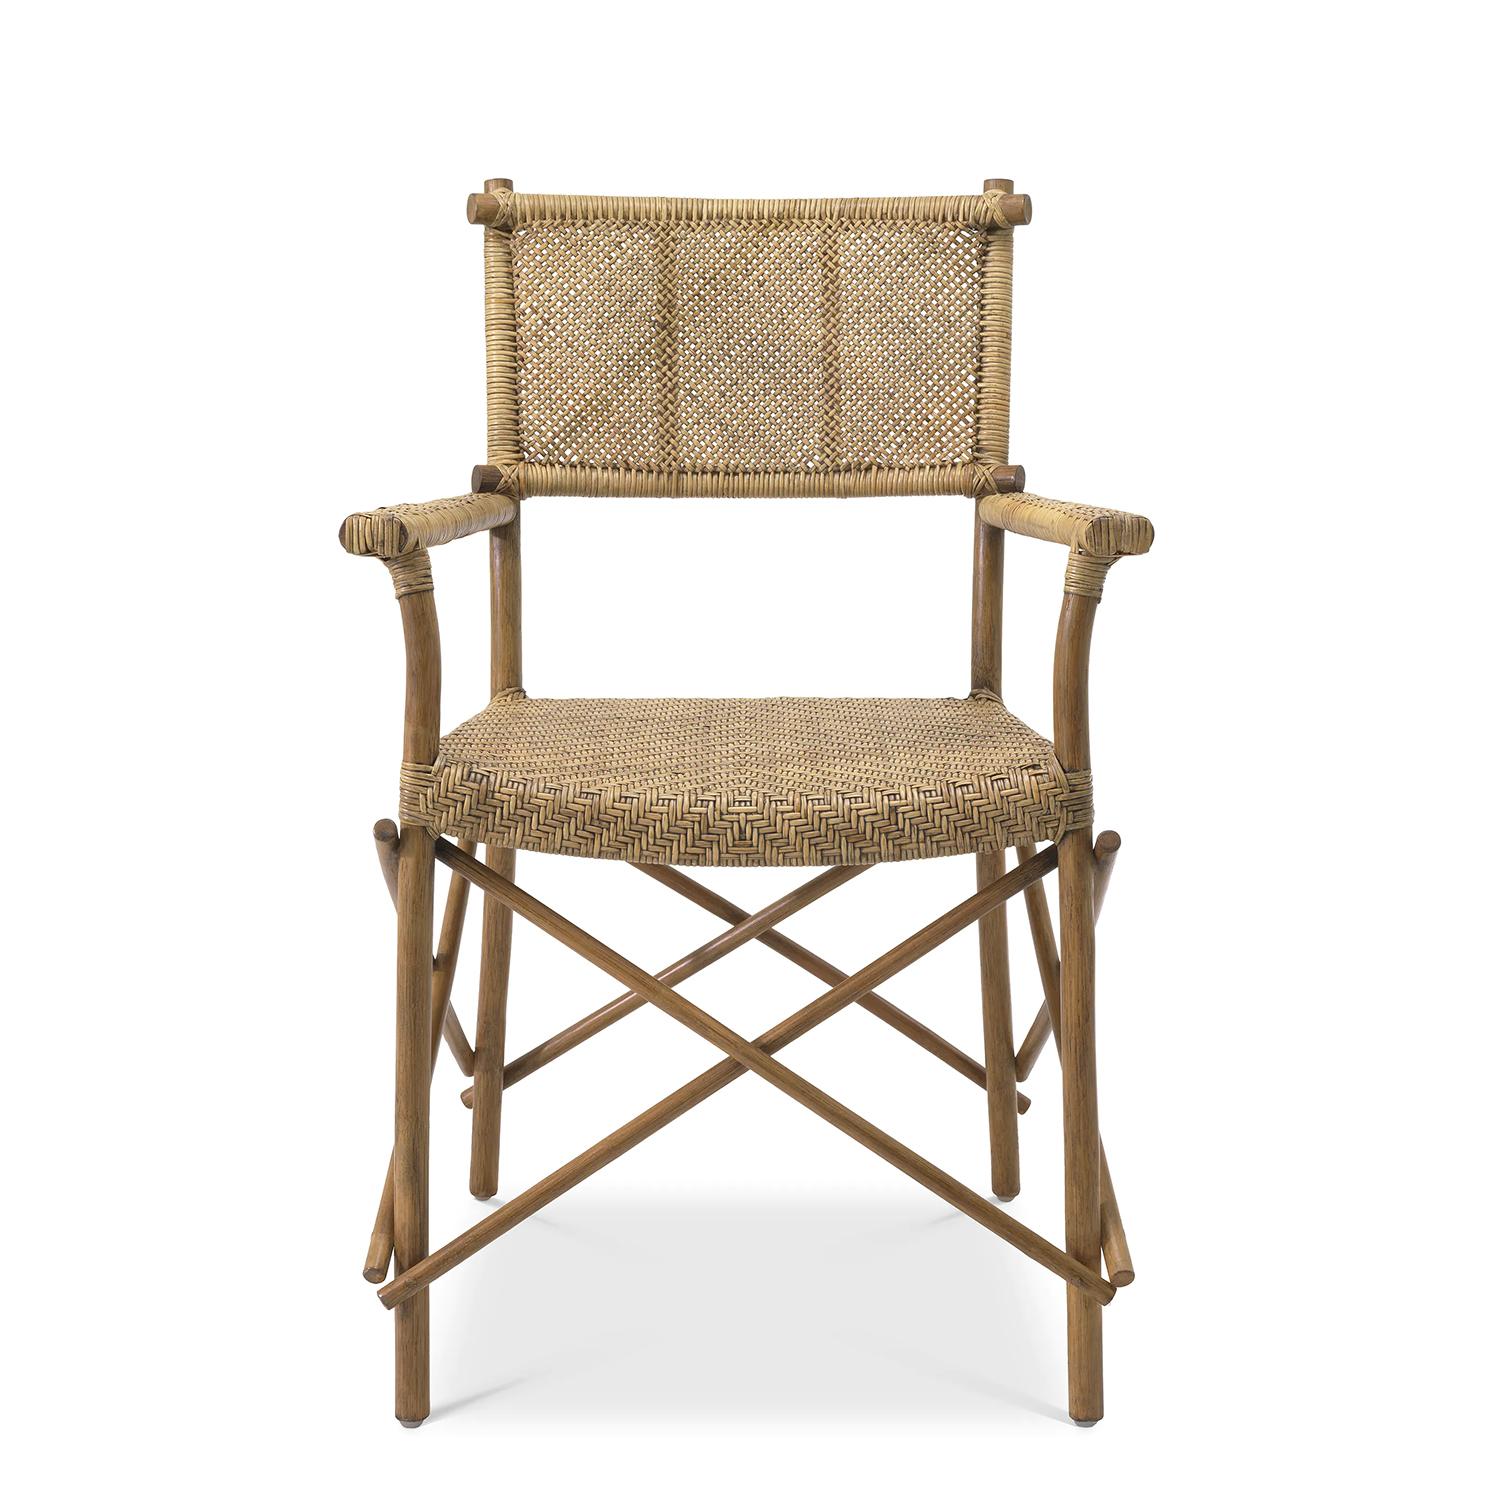 Chair Rattan Indo with all structure 
made in natural rattan.